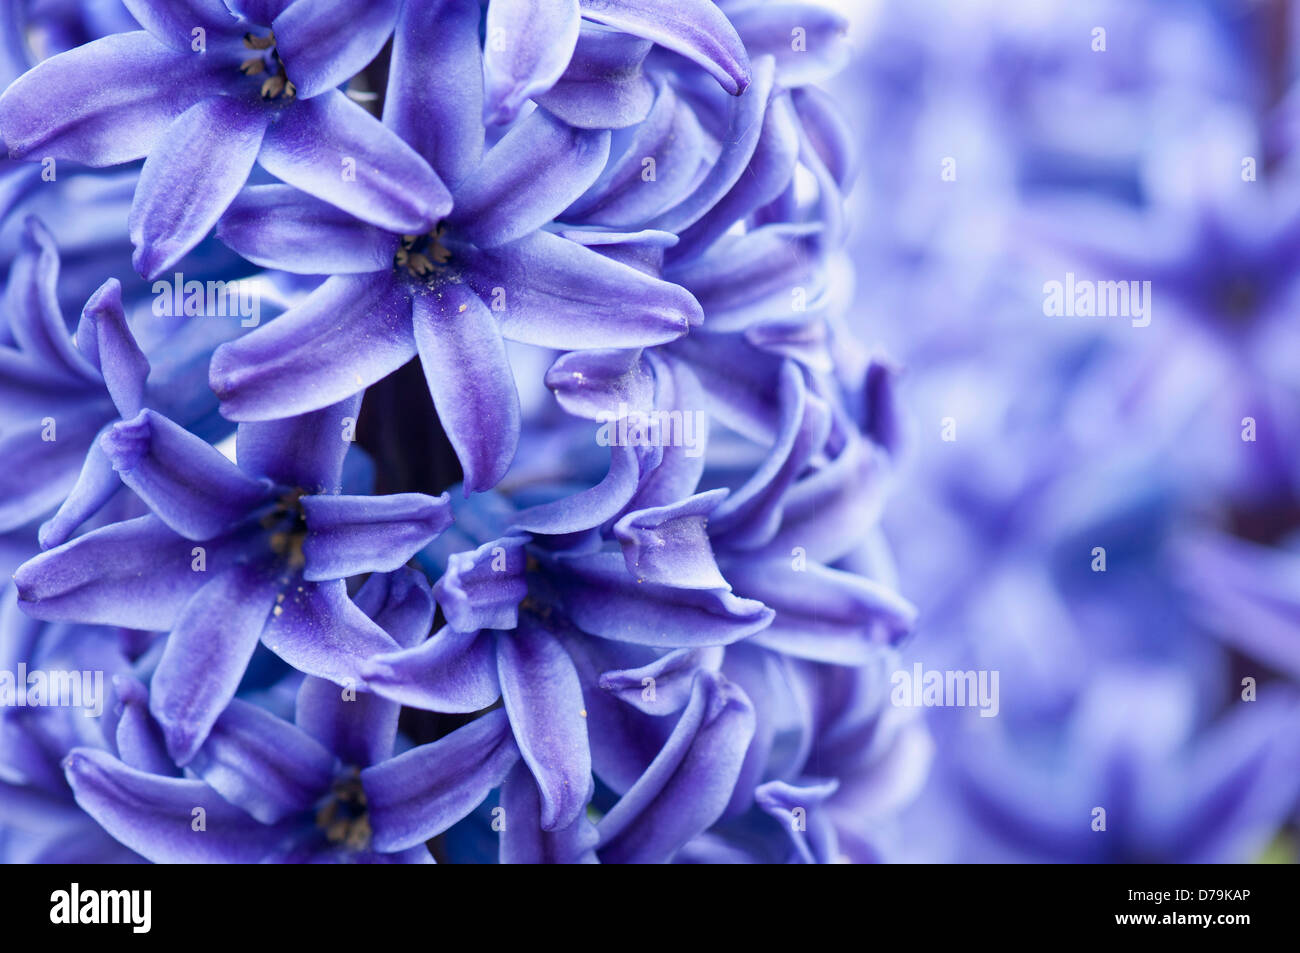 England, Dorset, Swanage, Close cropped view of dense spike of purple-blue hyacinth, Hyacinthus, flowers. Stock Photo